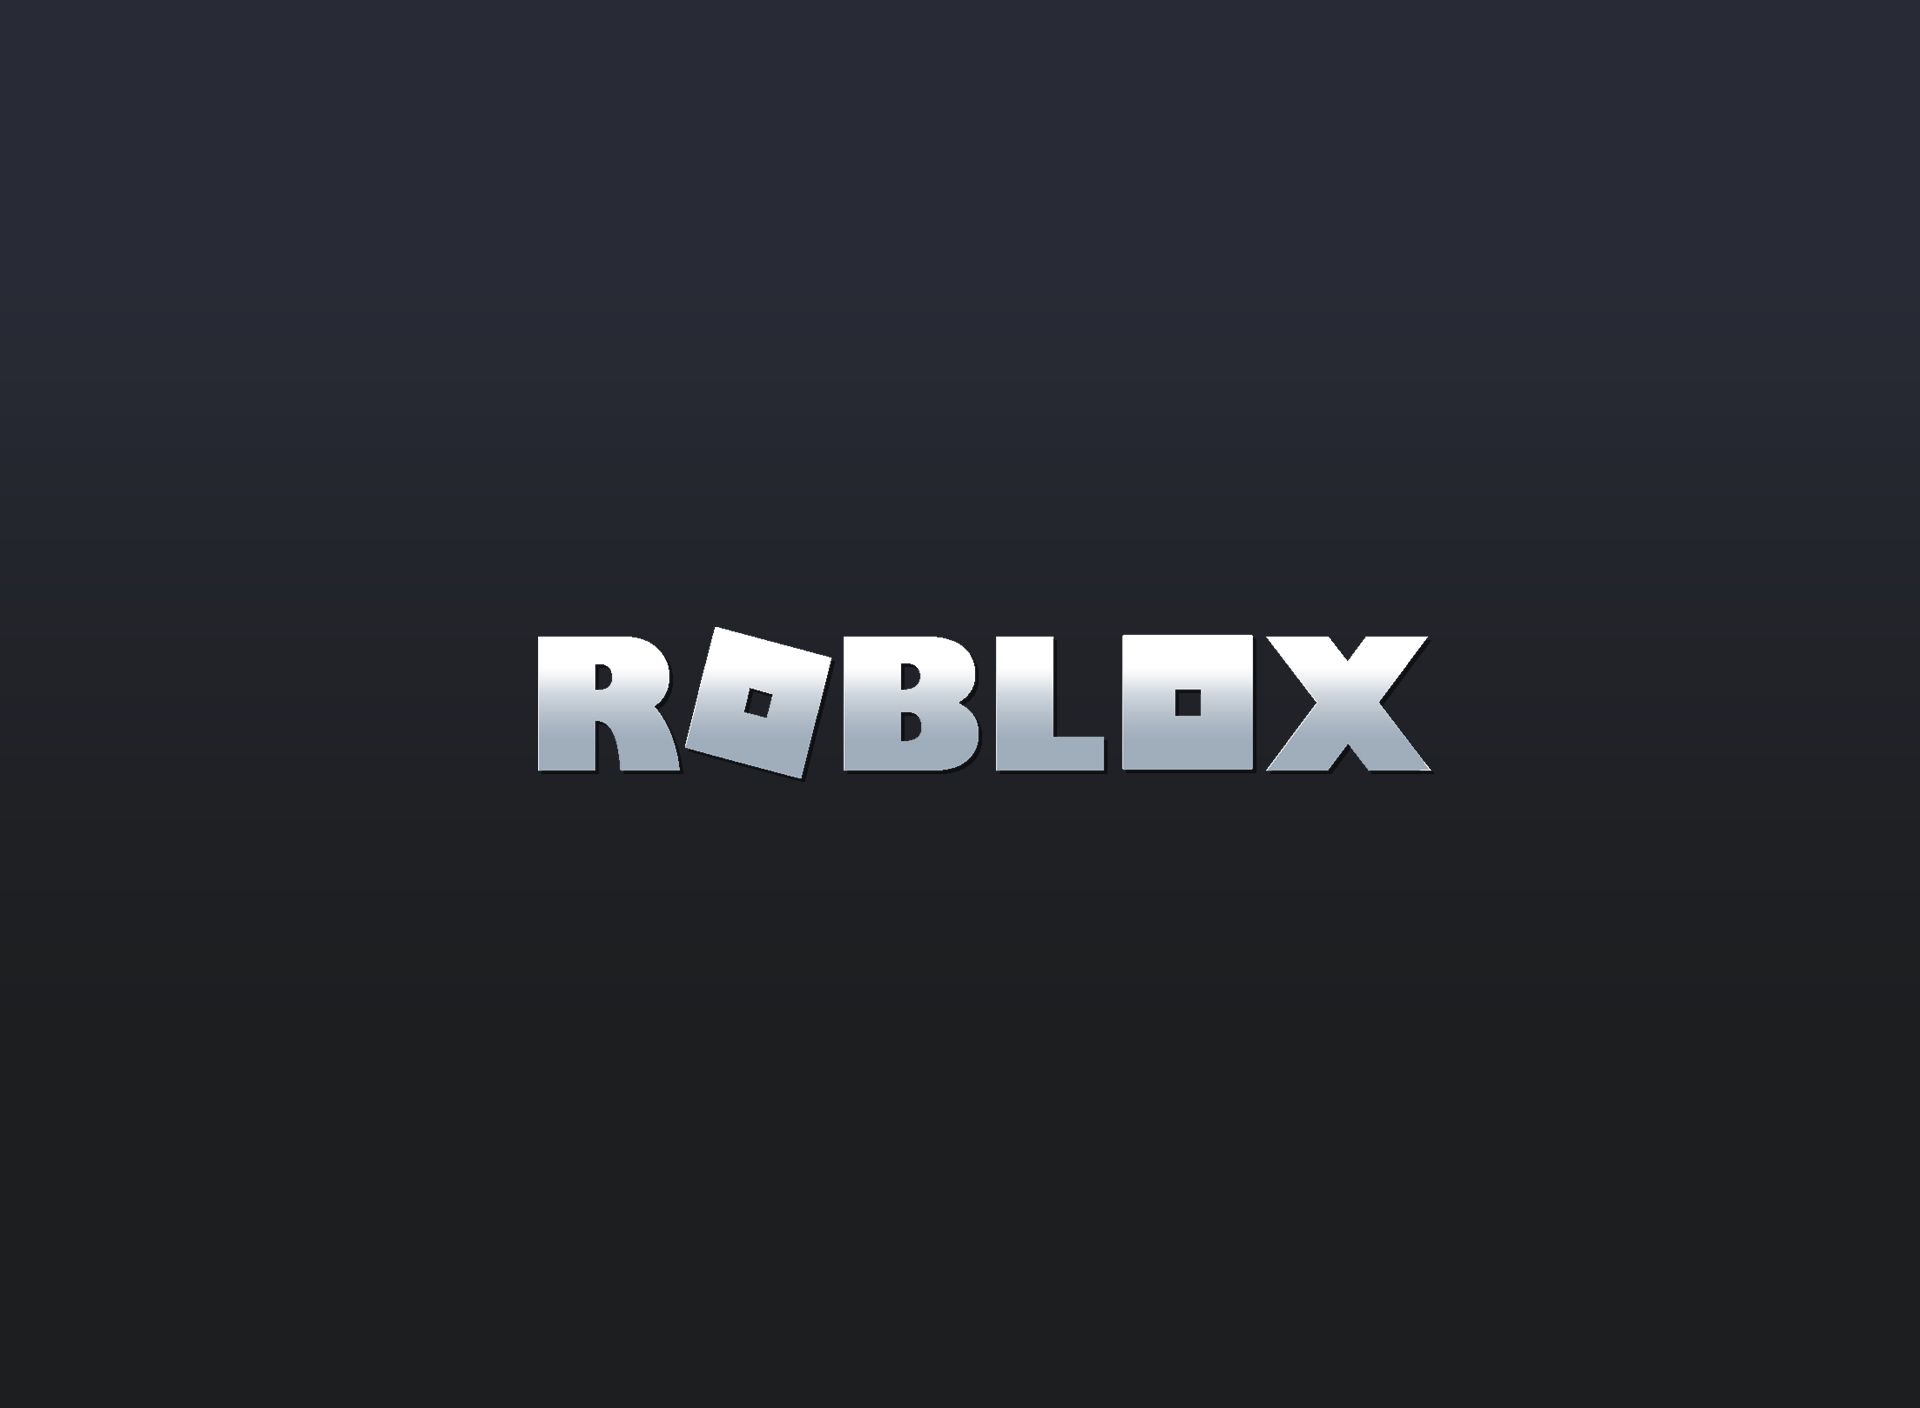 Roblox Background HD. Roblox, Roblox picture, Anime character drawing